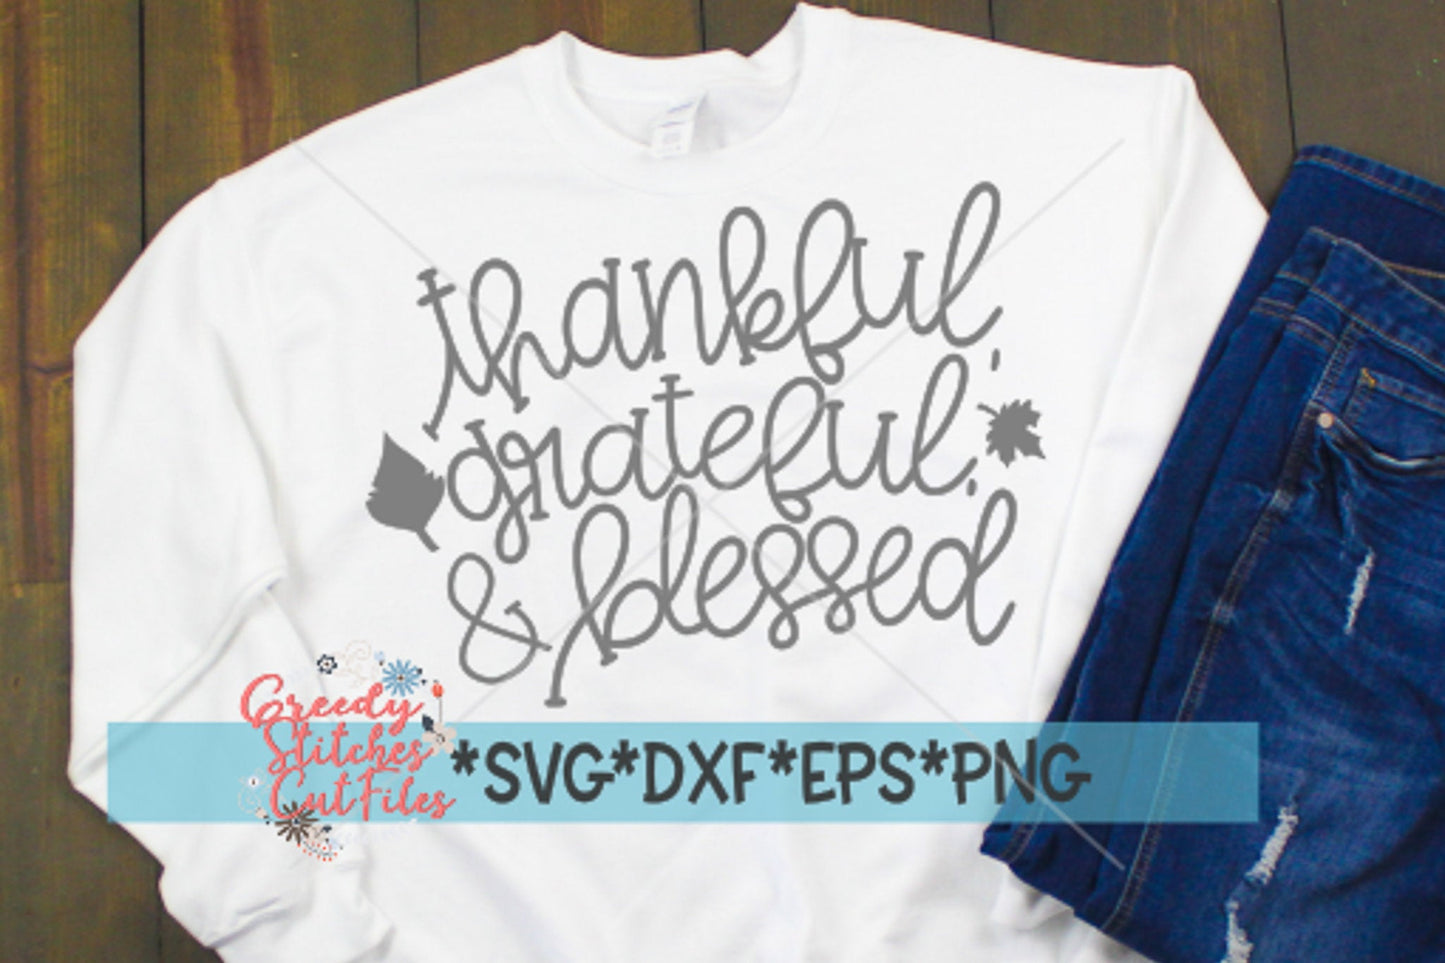 Thankful, Grateful, & Blessed svg, dxf, eps, png. Thankful SvG | Grateful SvG | Blessed SvG | Fall SvG | Instant Download Cut Files.